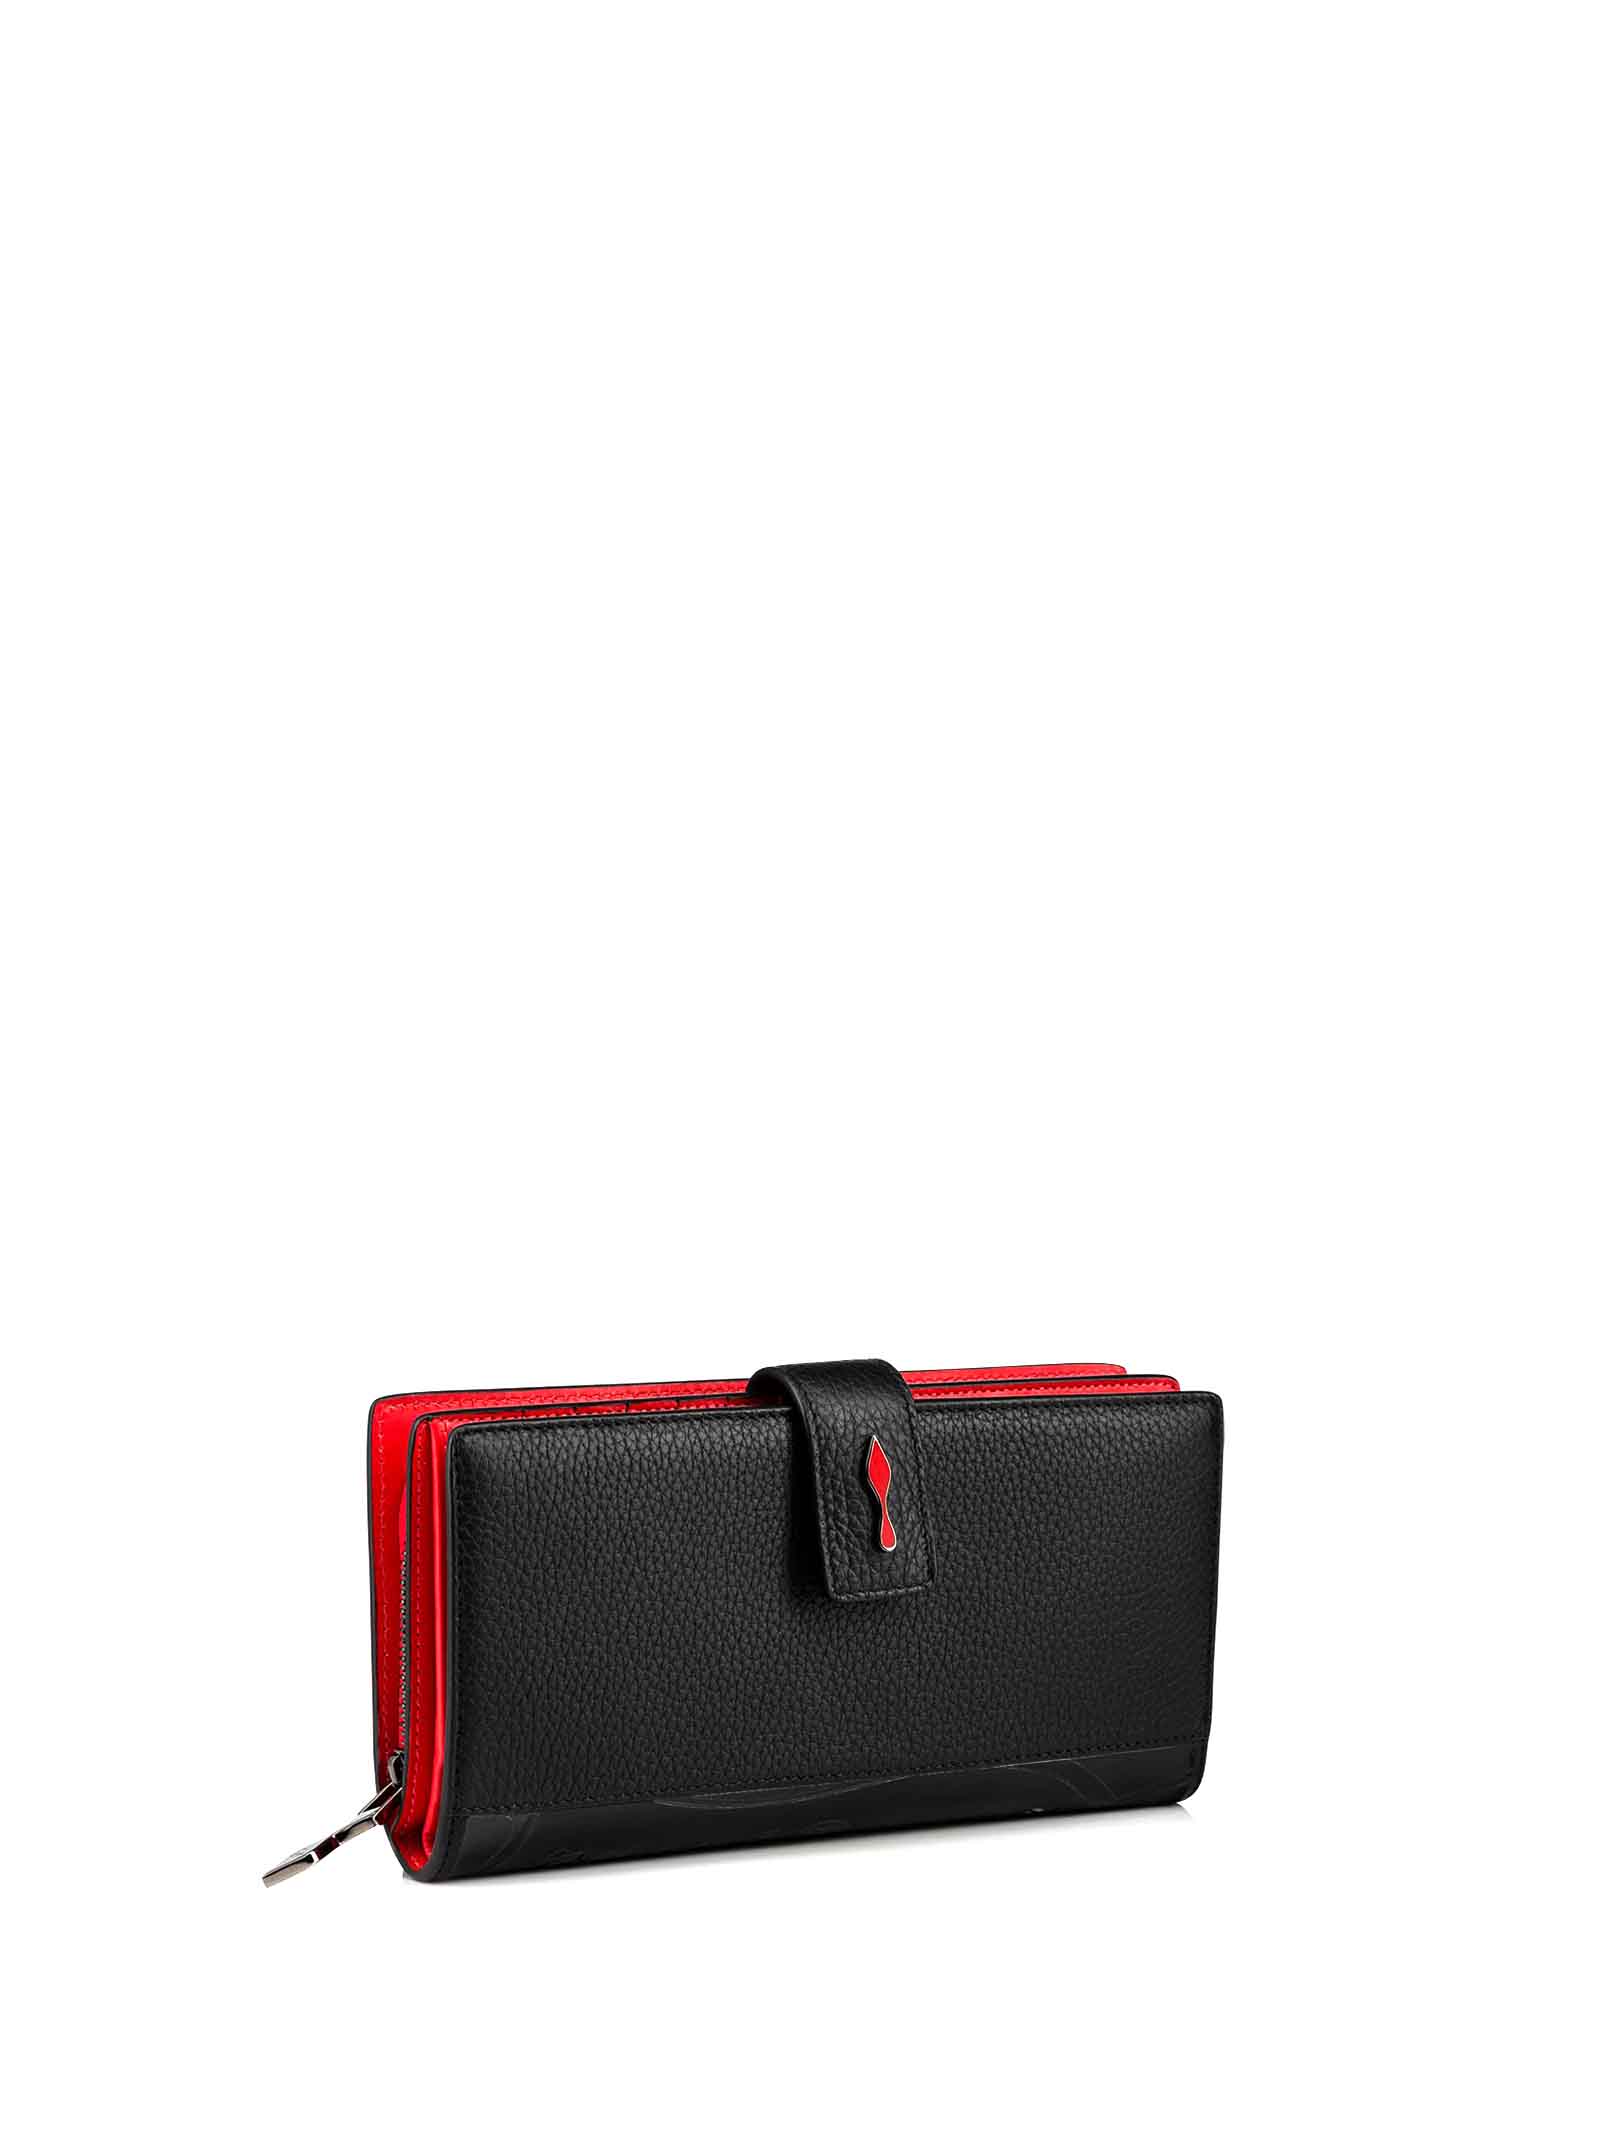 Christian Louboutin Paloma Wallet Flash Sales, 50% OFF | www.hcb.cat